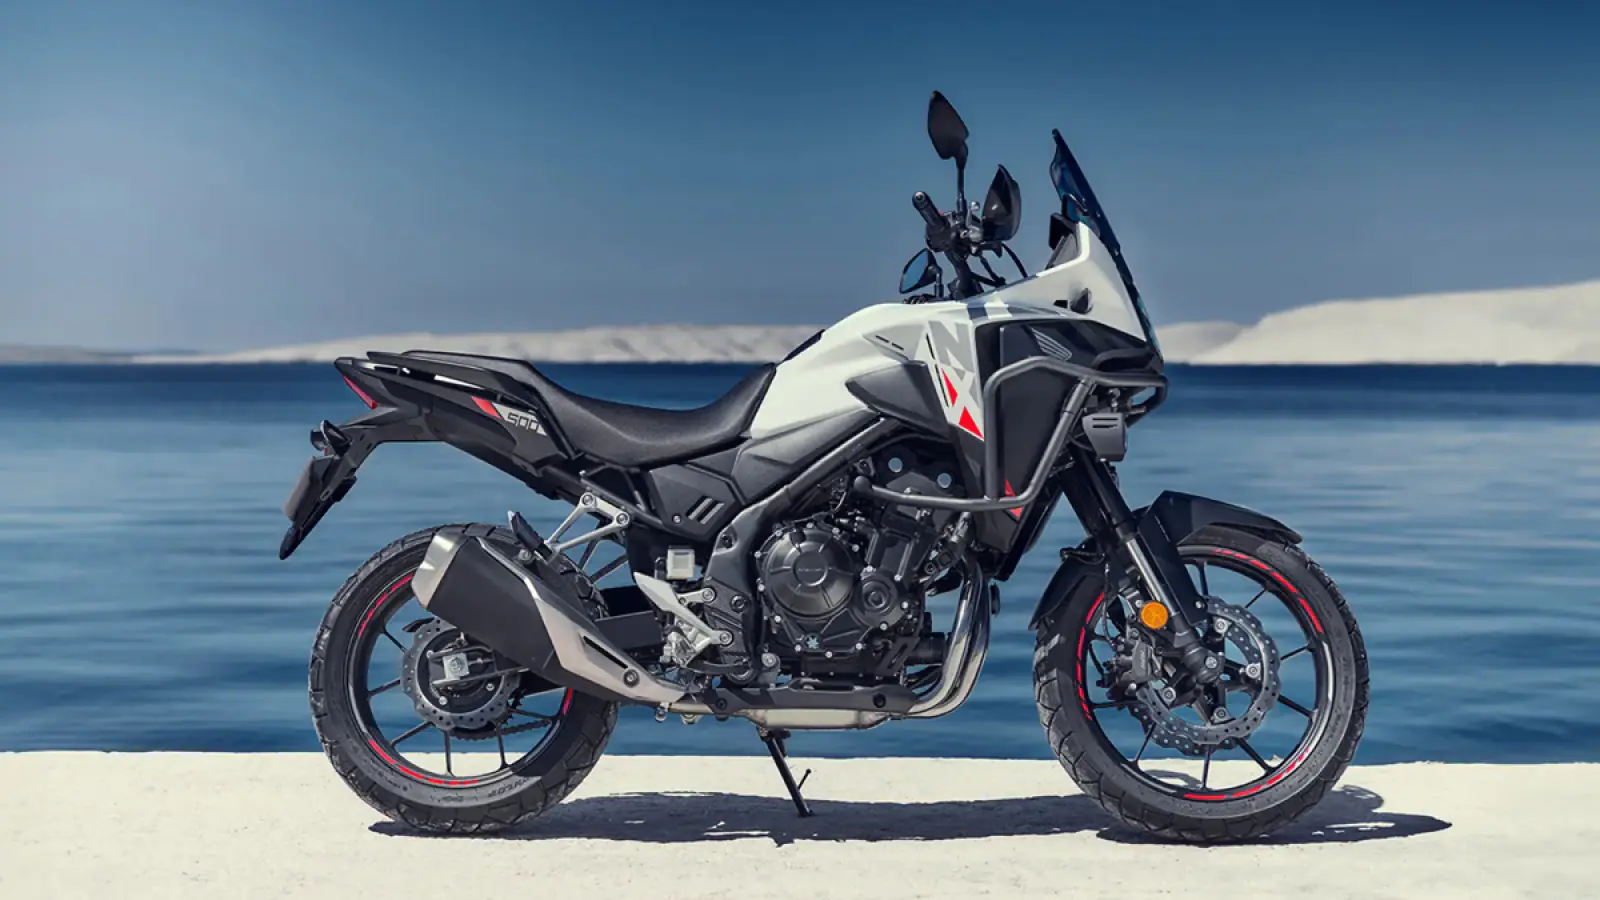 Delivery started in India for Honda NX500, know all the details of engine and price